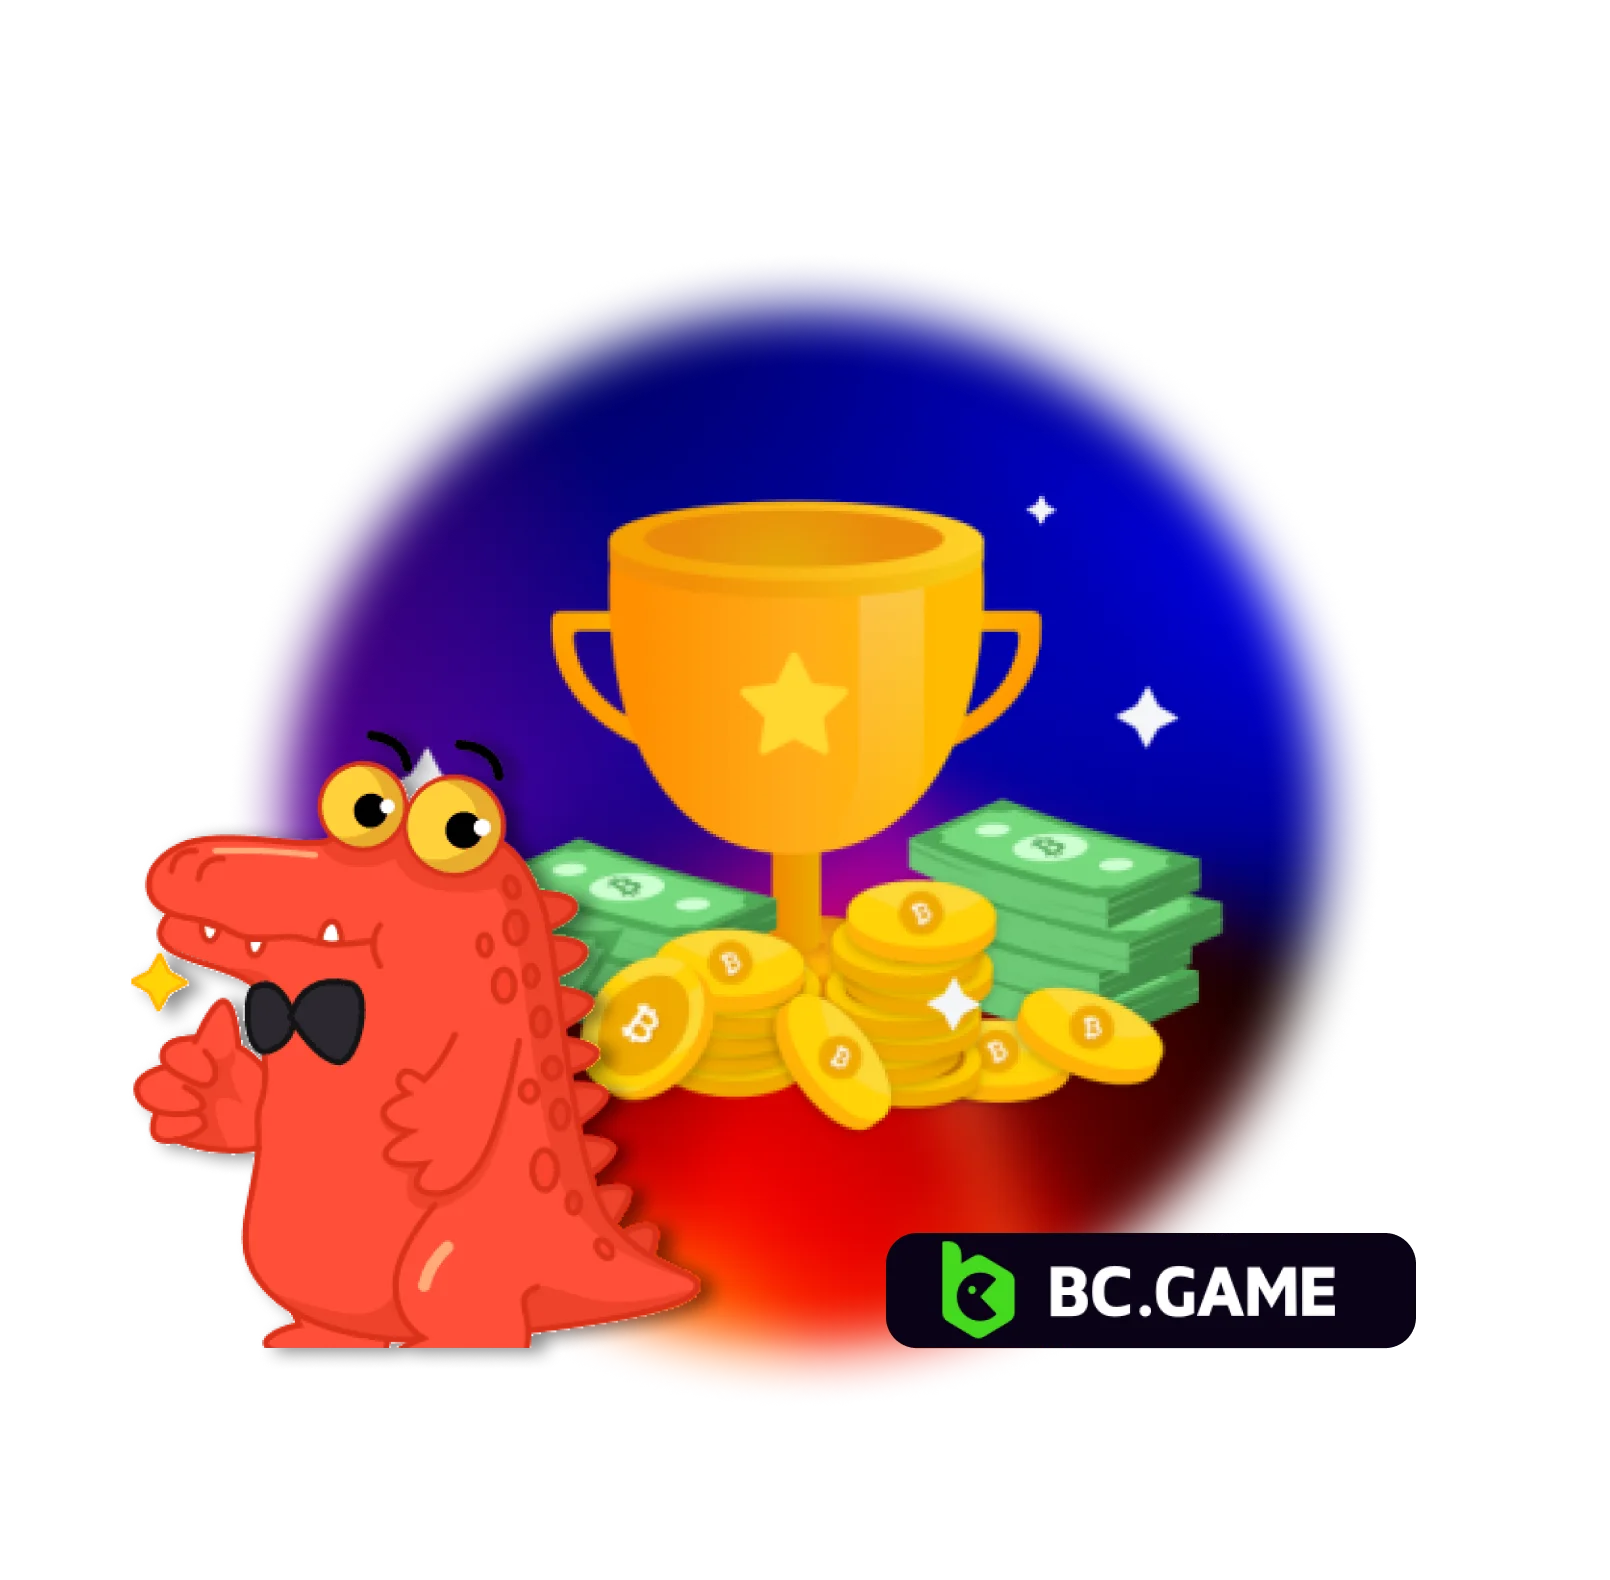 Explore a fantastic world of BC.Game Deposit bonuses and enroll your winnings!